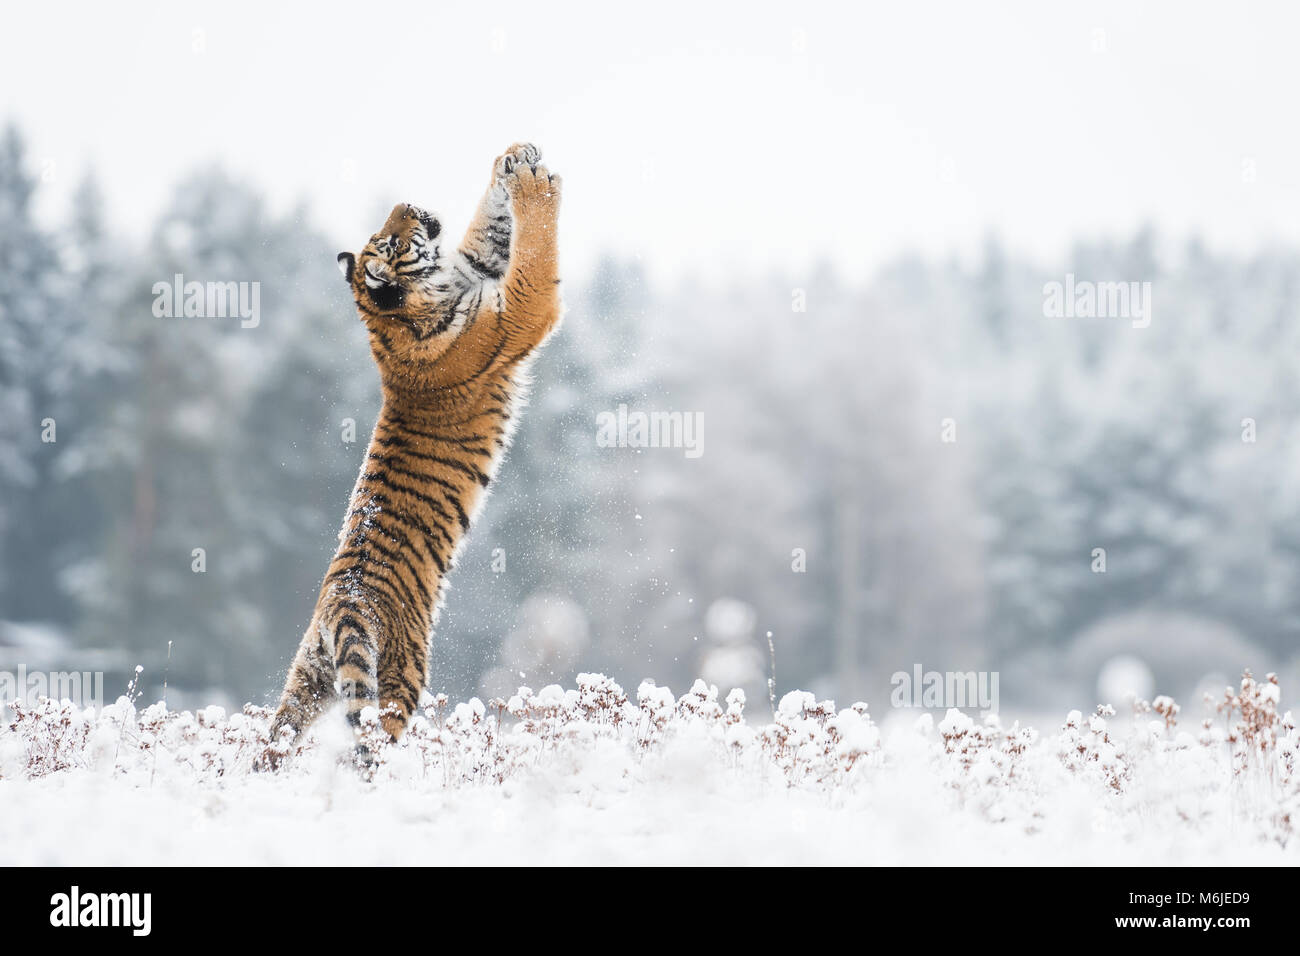 Young Siberian tiger junping and playing with snow Stock Photo